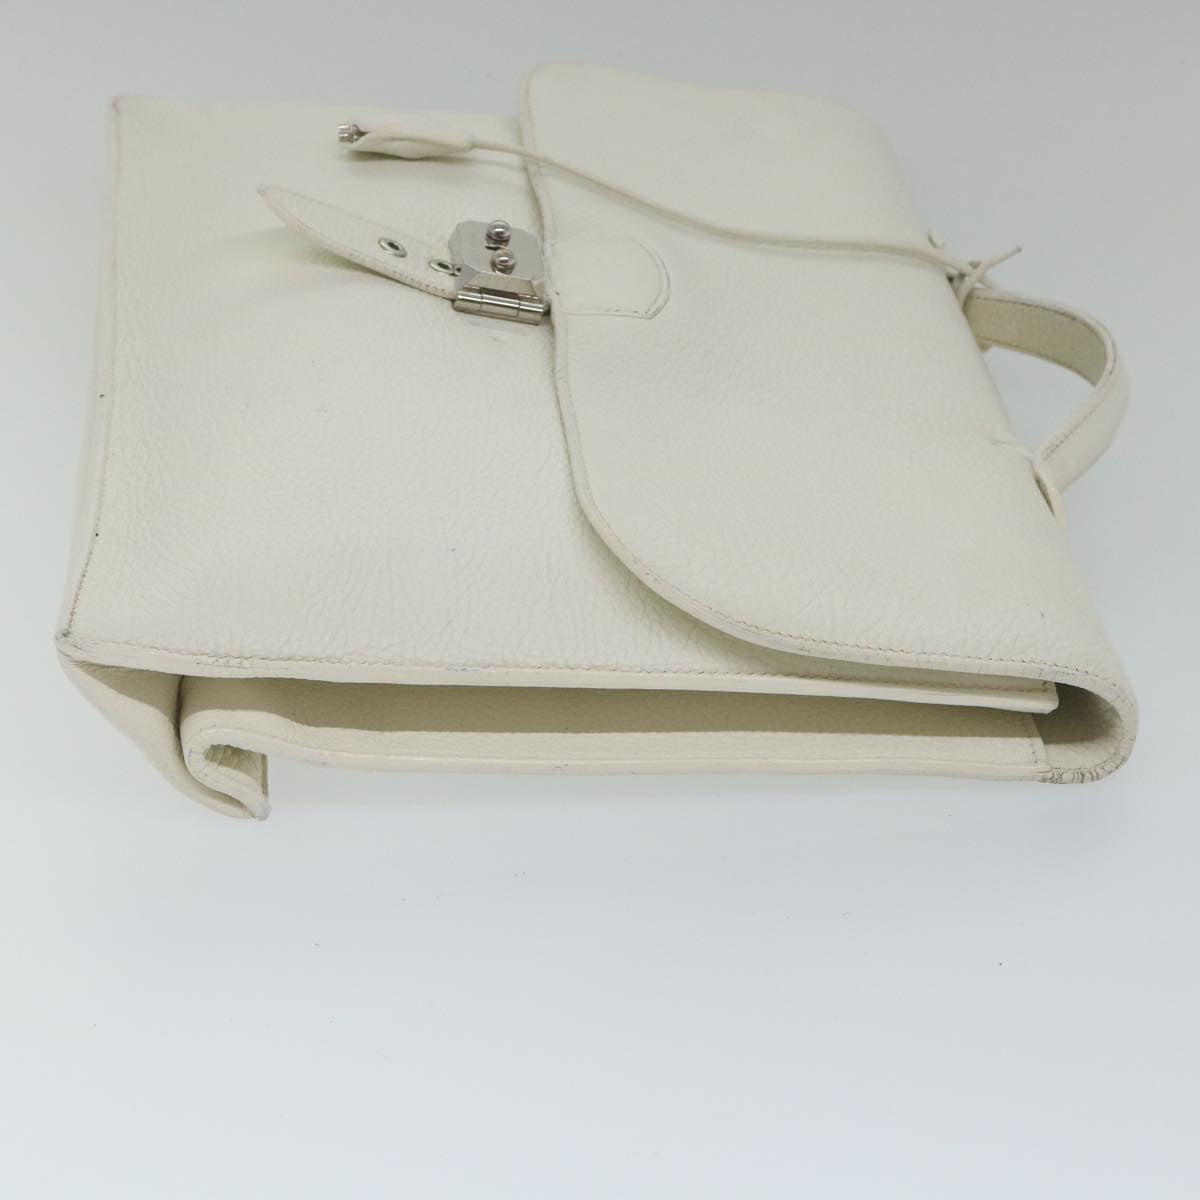 HERMES Sac Adepesh Business Bag Leather White Auth bs9397